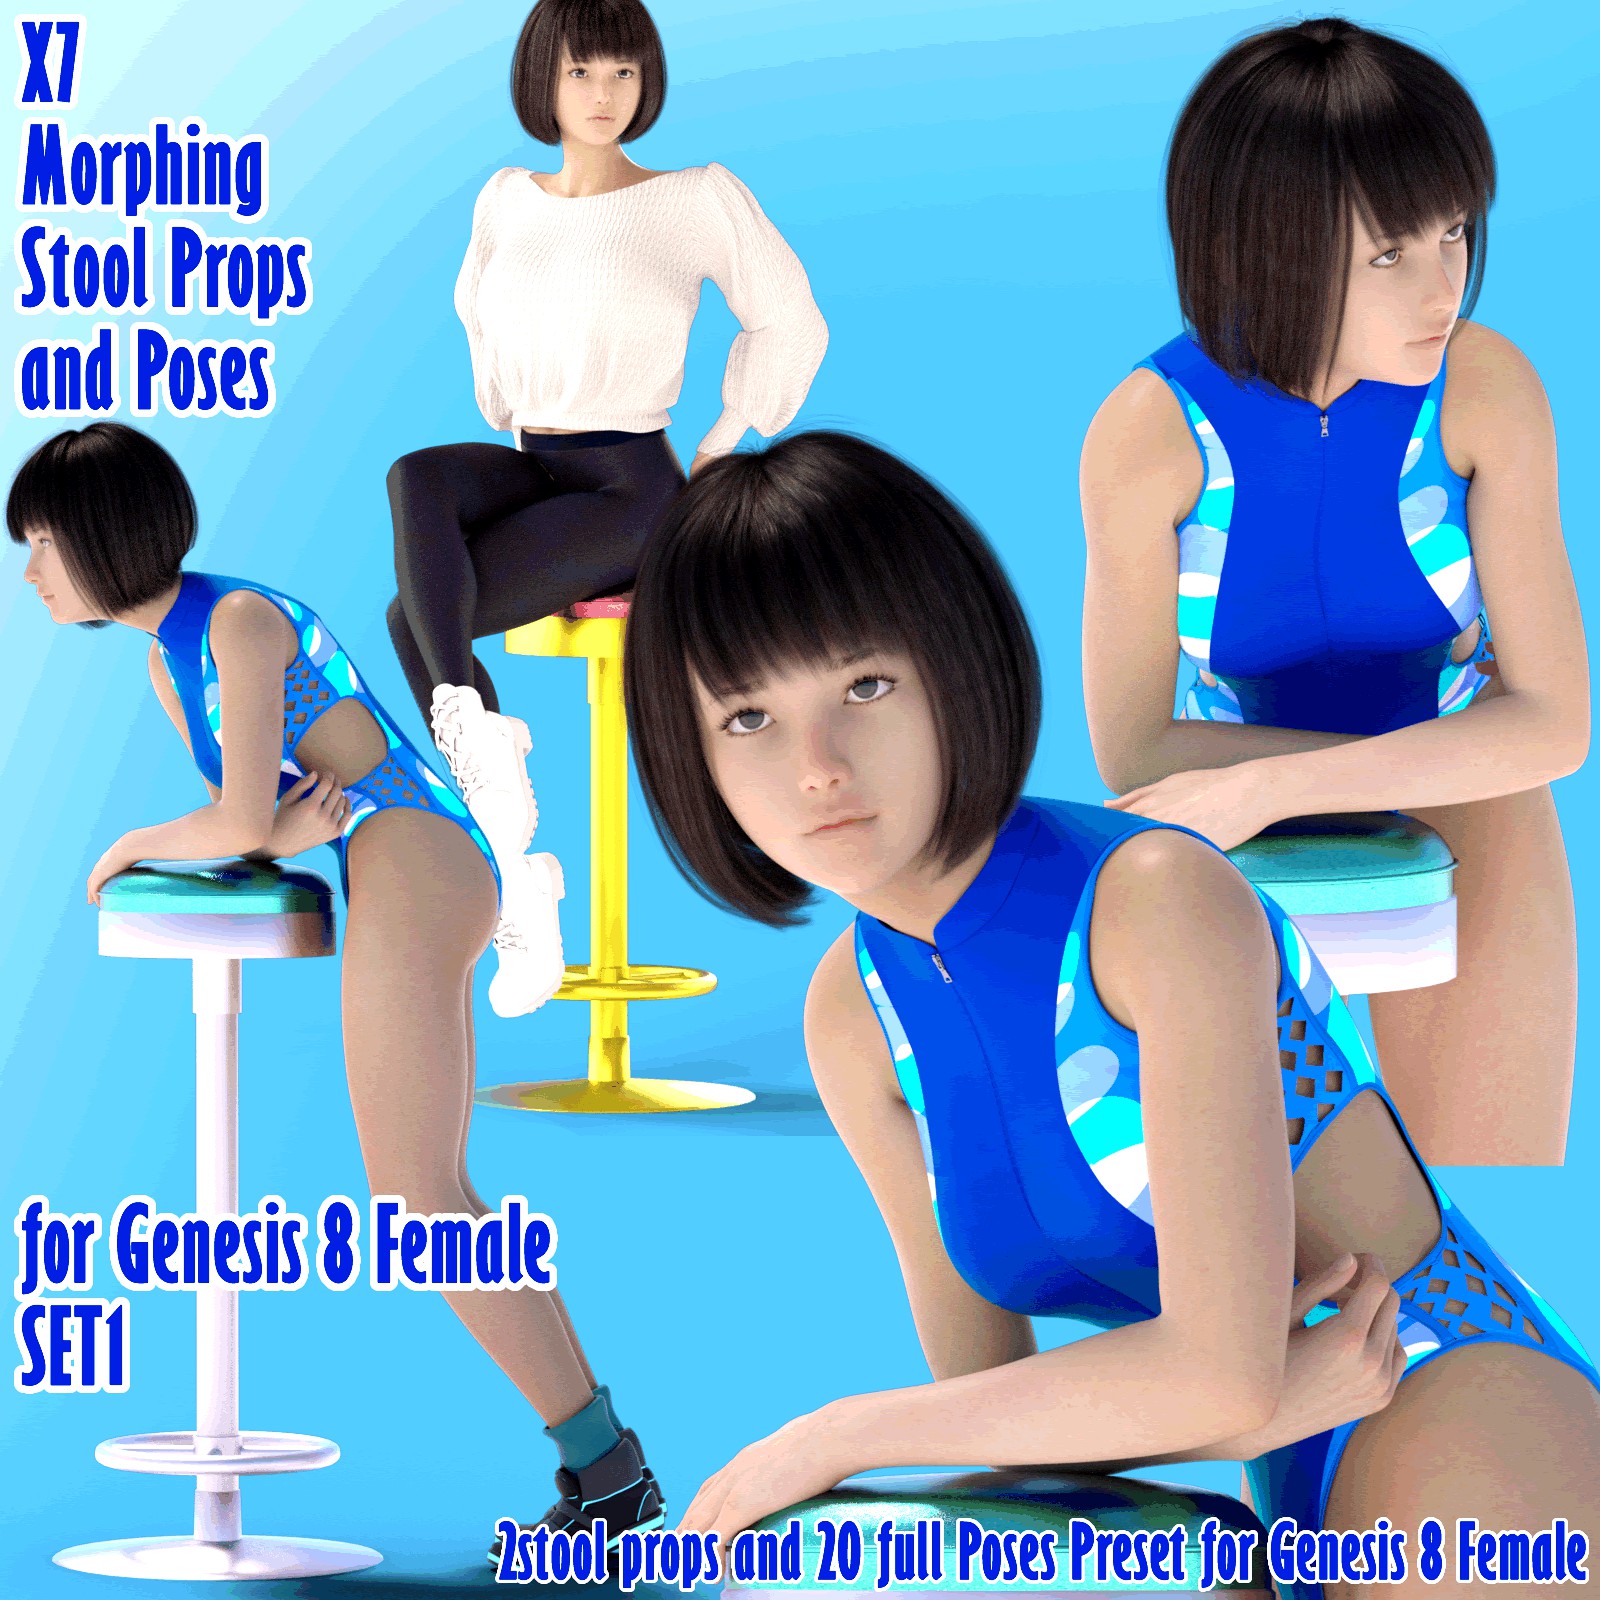 X7 Morphing Stool Props and Poses for Genesis 8 Female  SET1